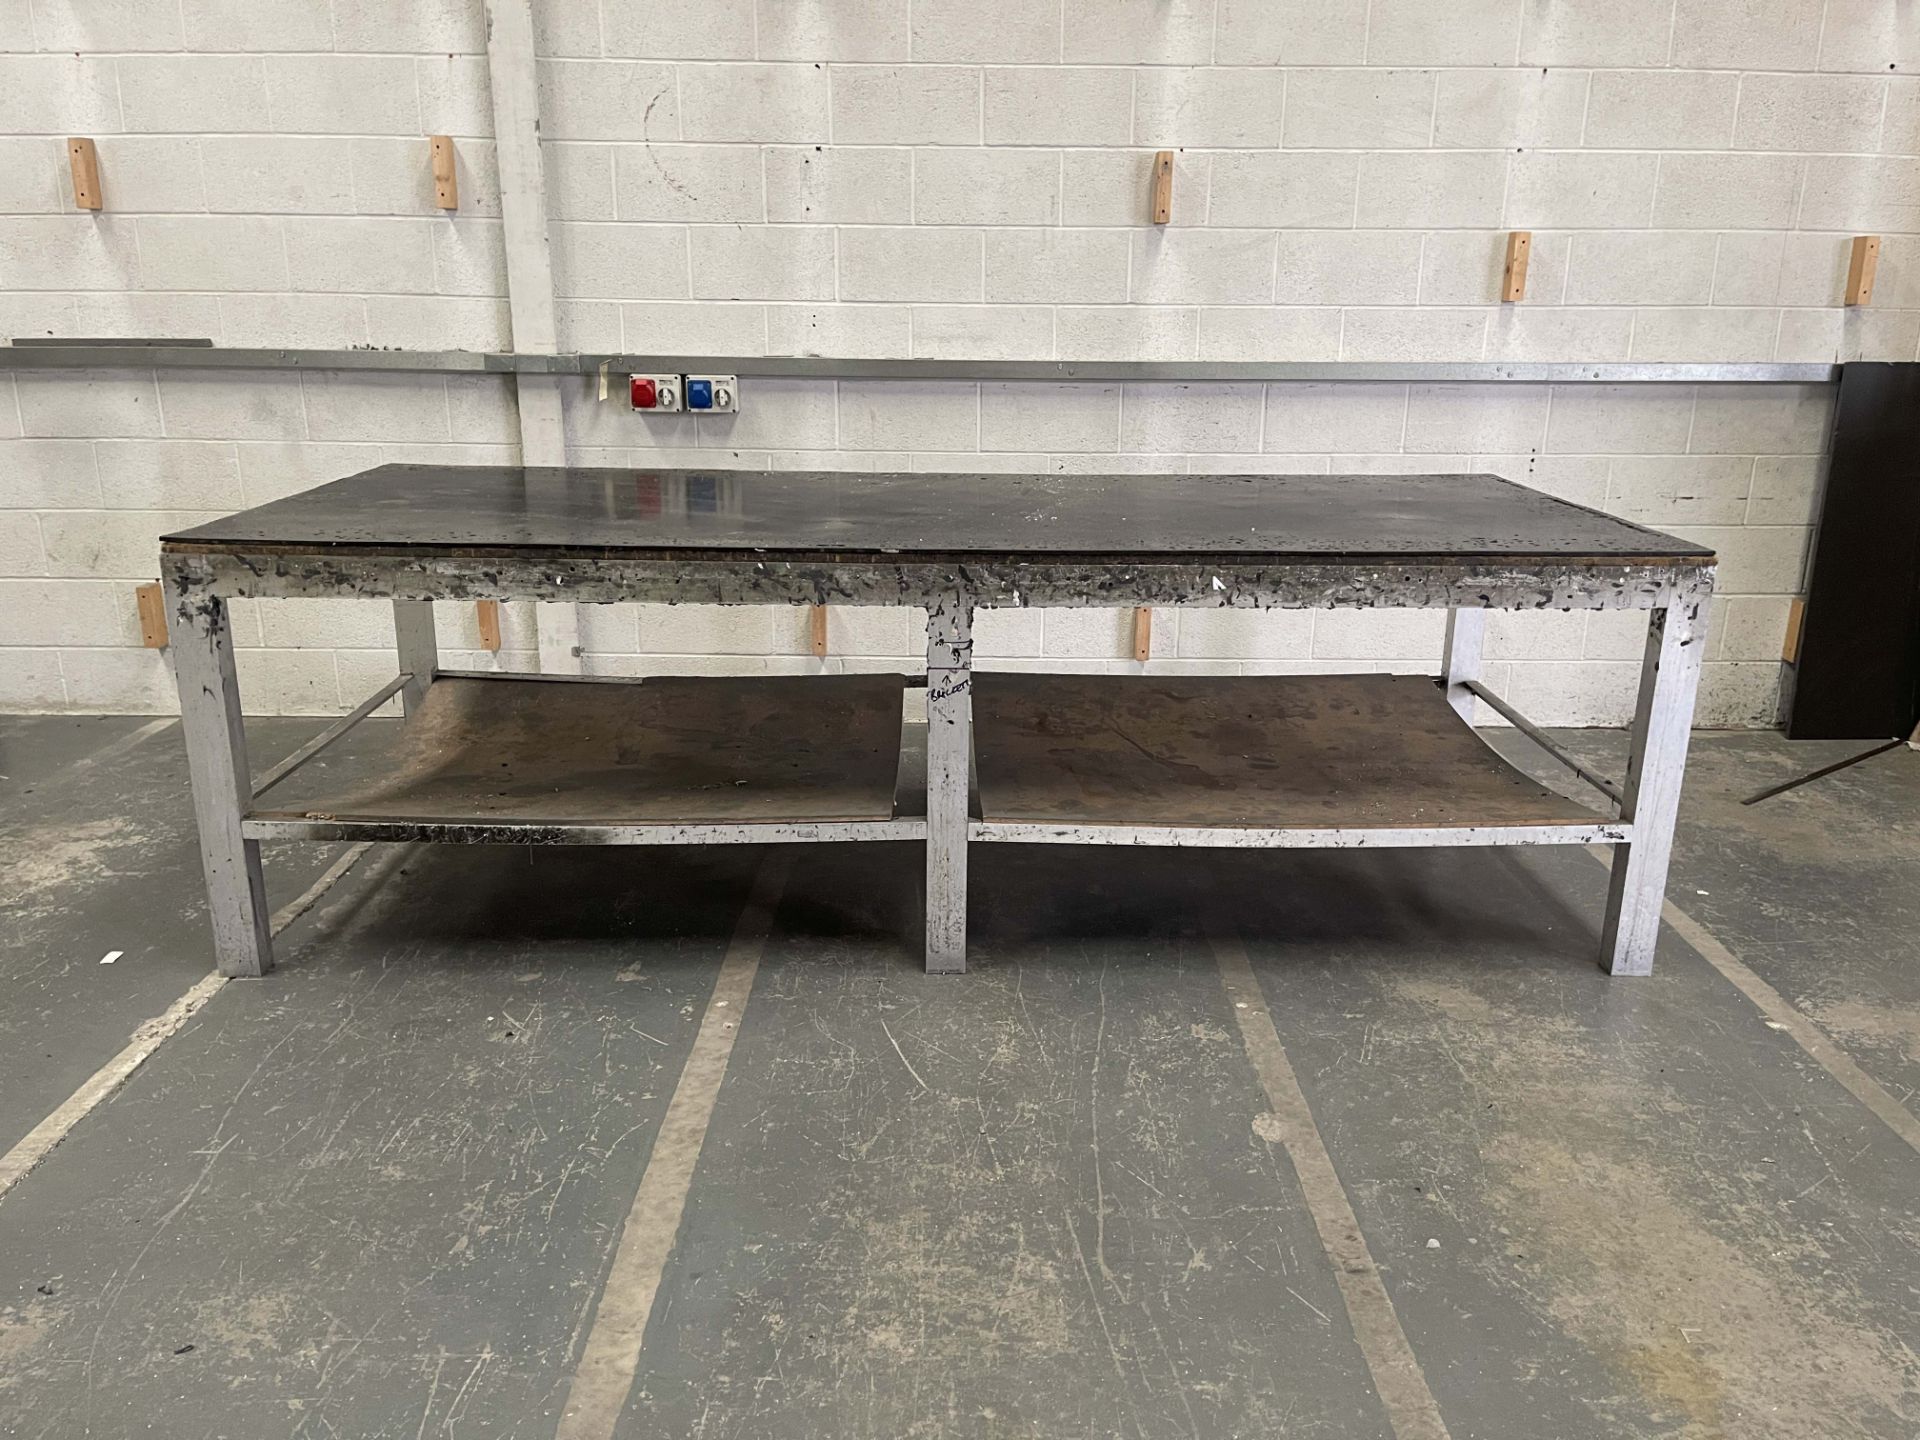 Aluminium Workbench With Rubber Top. Size: 10' x 4' x 3'1" High.